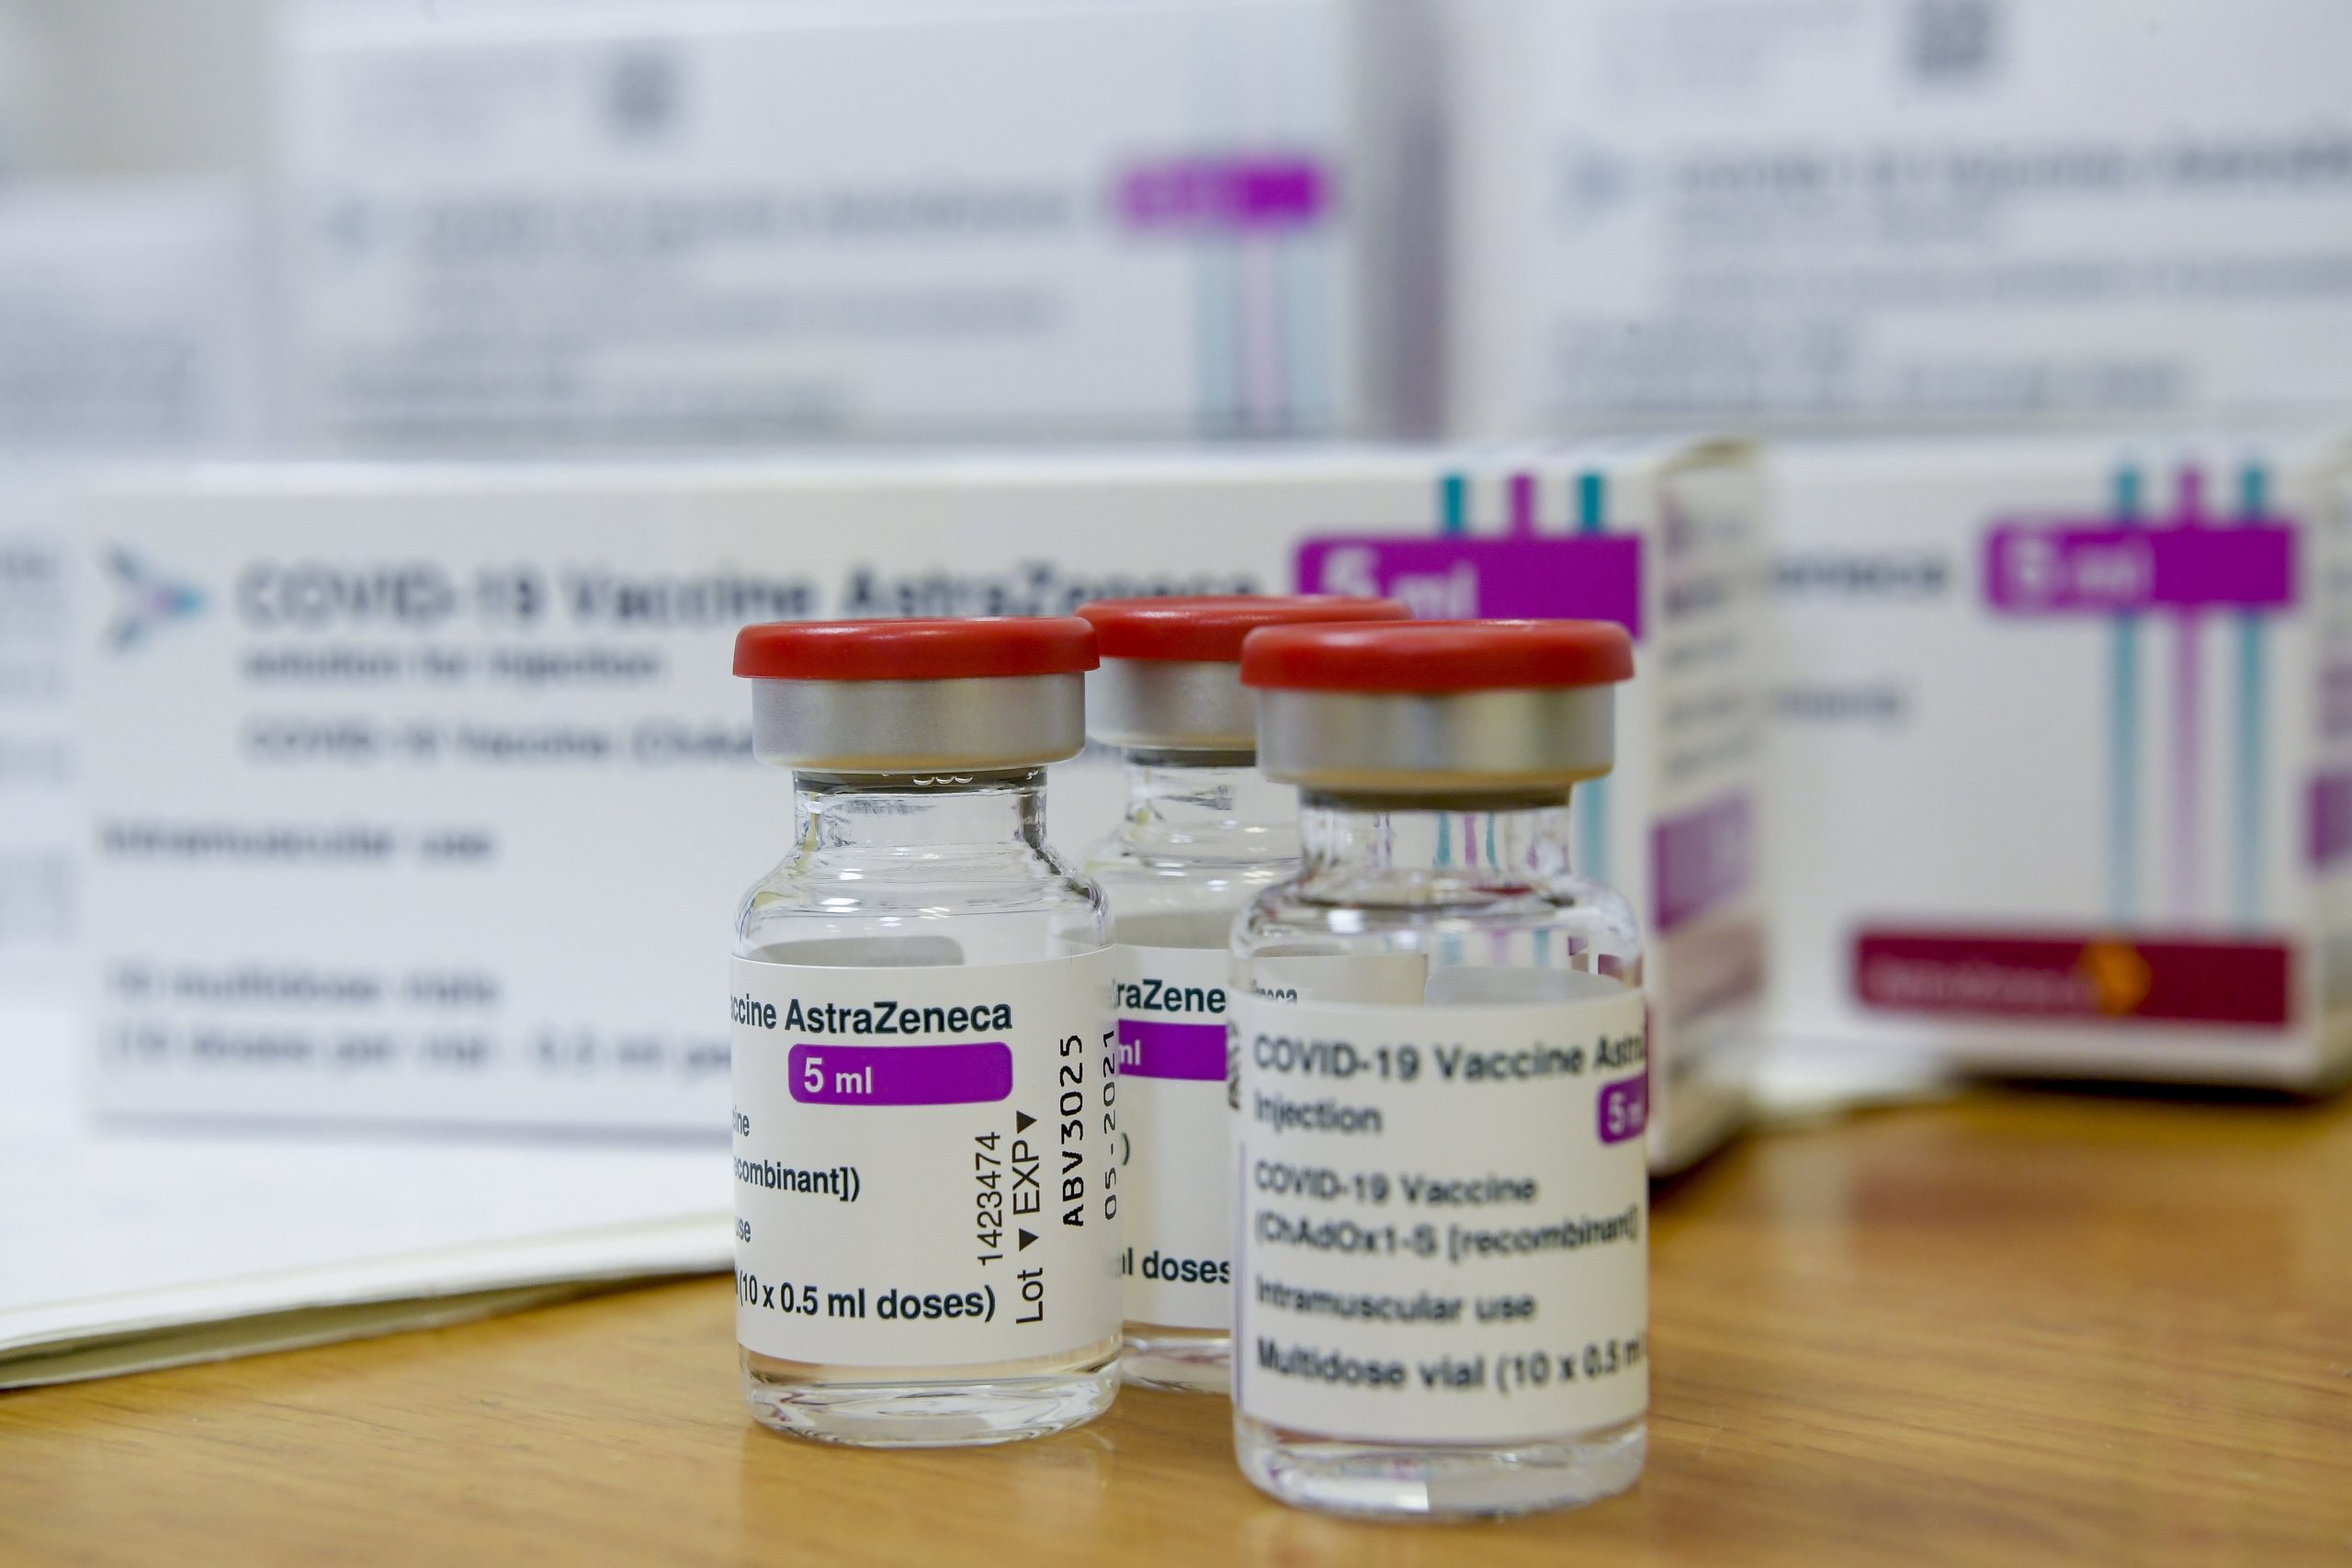 Hungary to Deliver 6,000 Vaccine Doses to North Macedonia